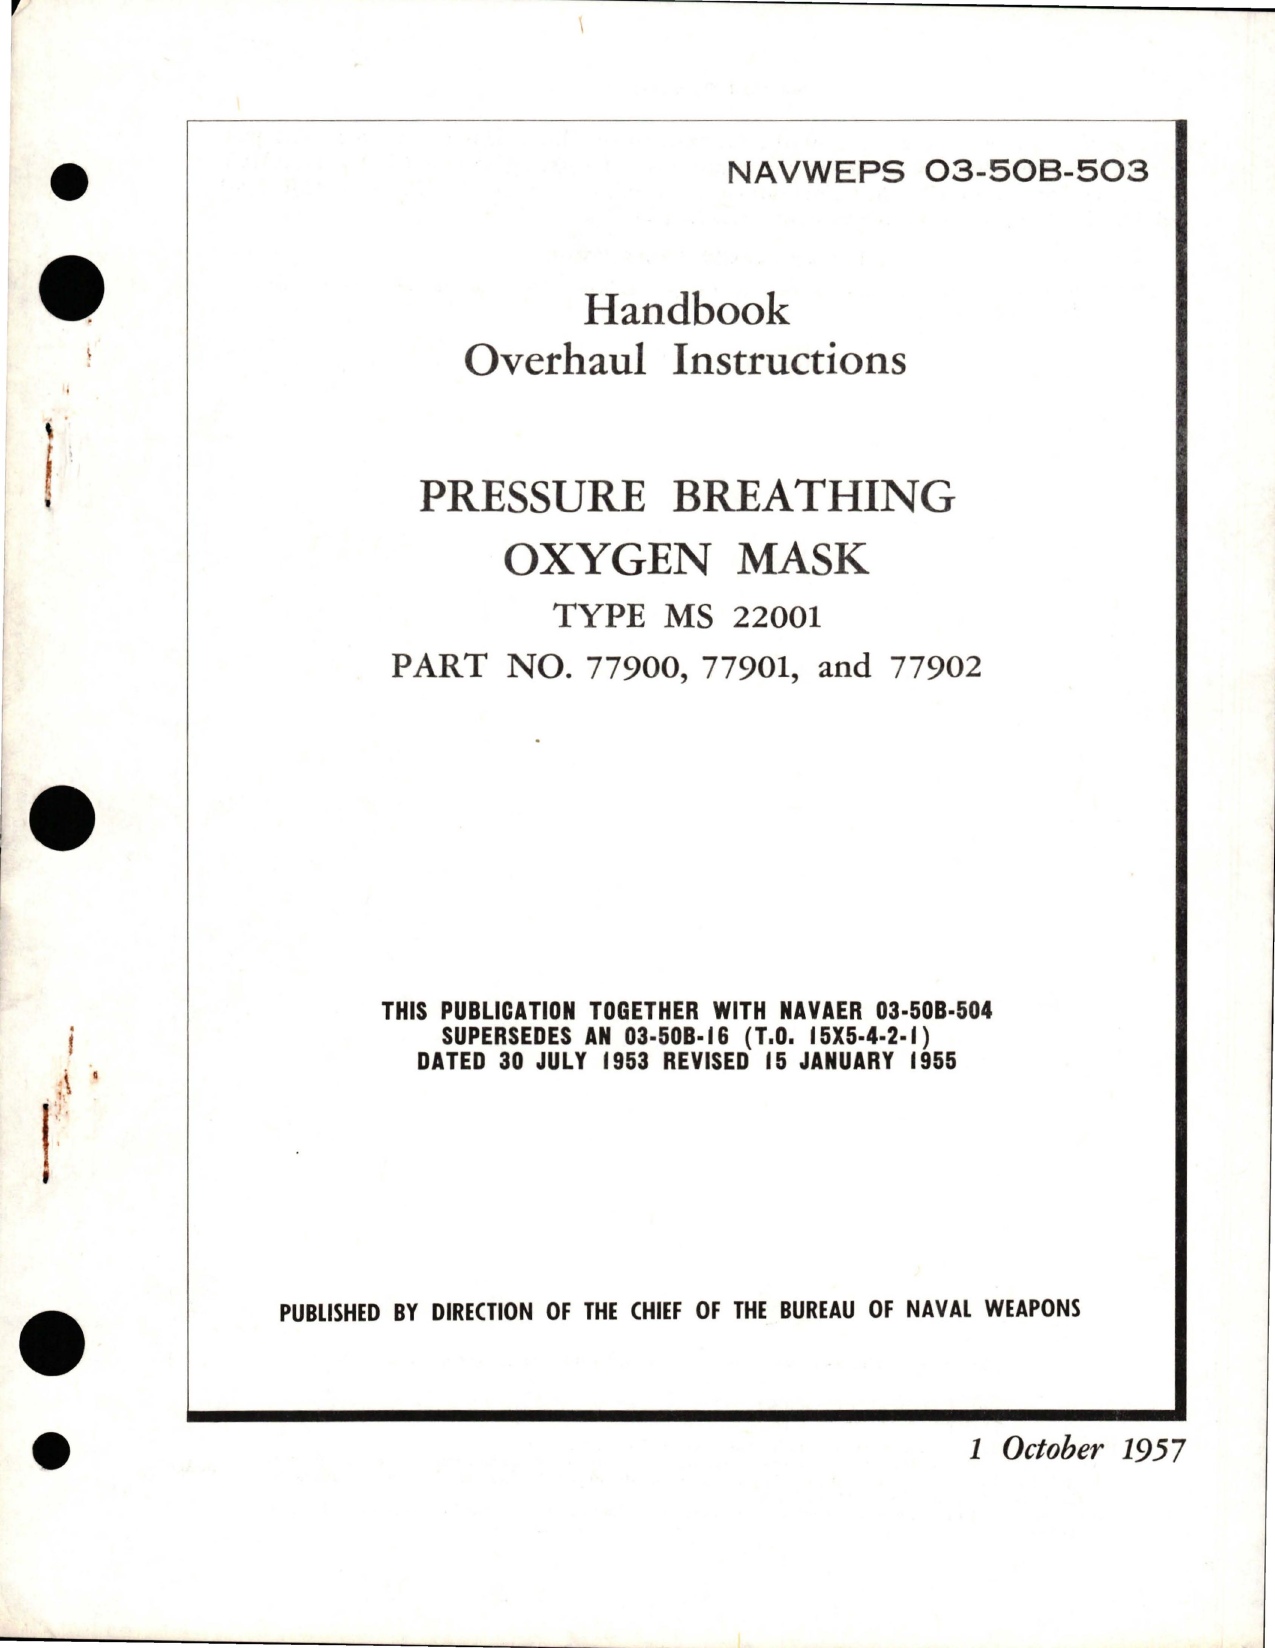 Sample page 1 from AirCorps Library document: Overhaul Instructions for Pressure Breathing Oxygen Mask - Type MS 22001 - Part 77900, 77901, and 77902 